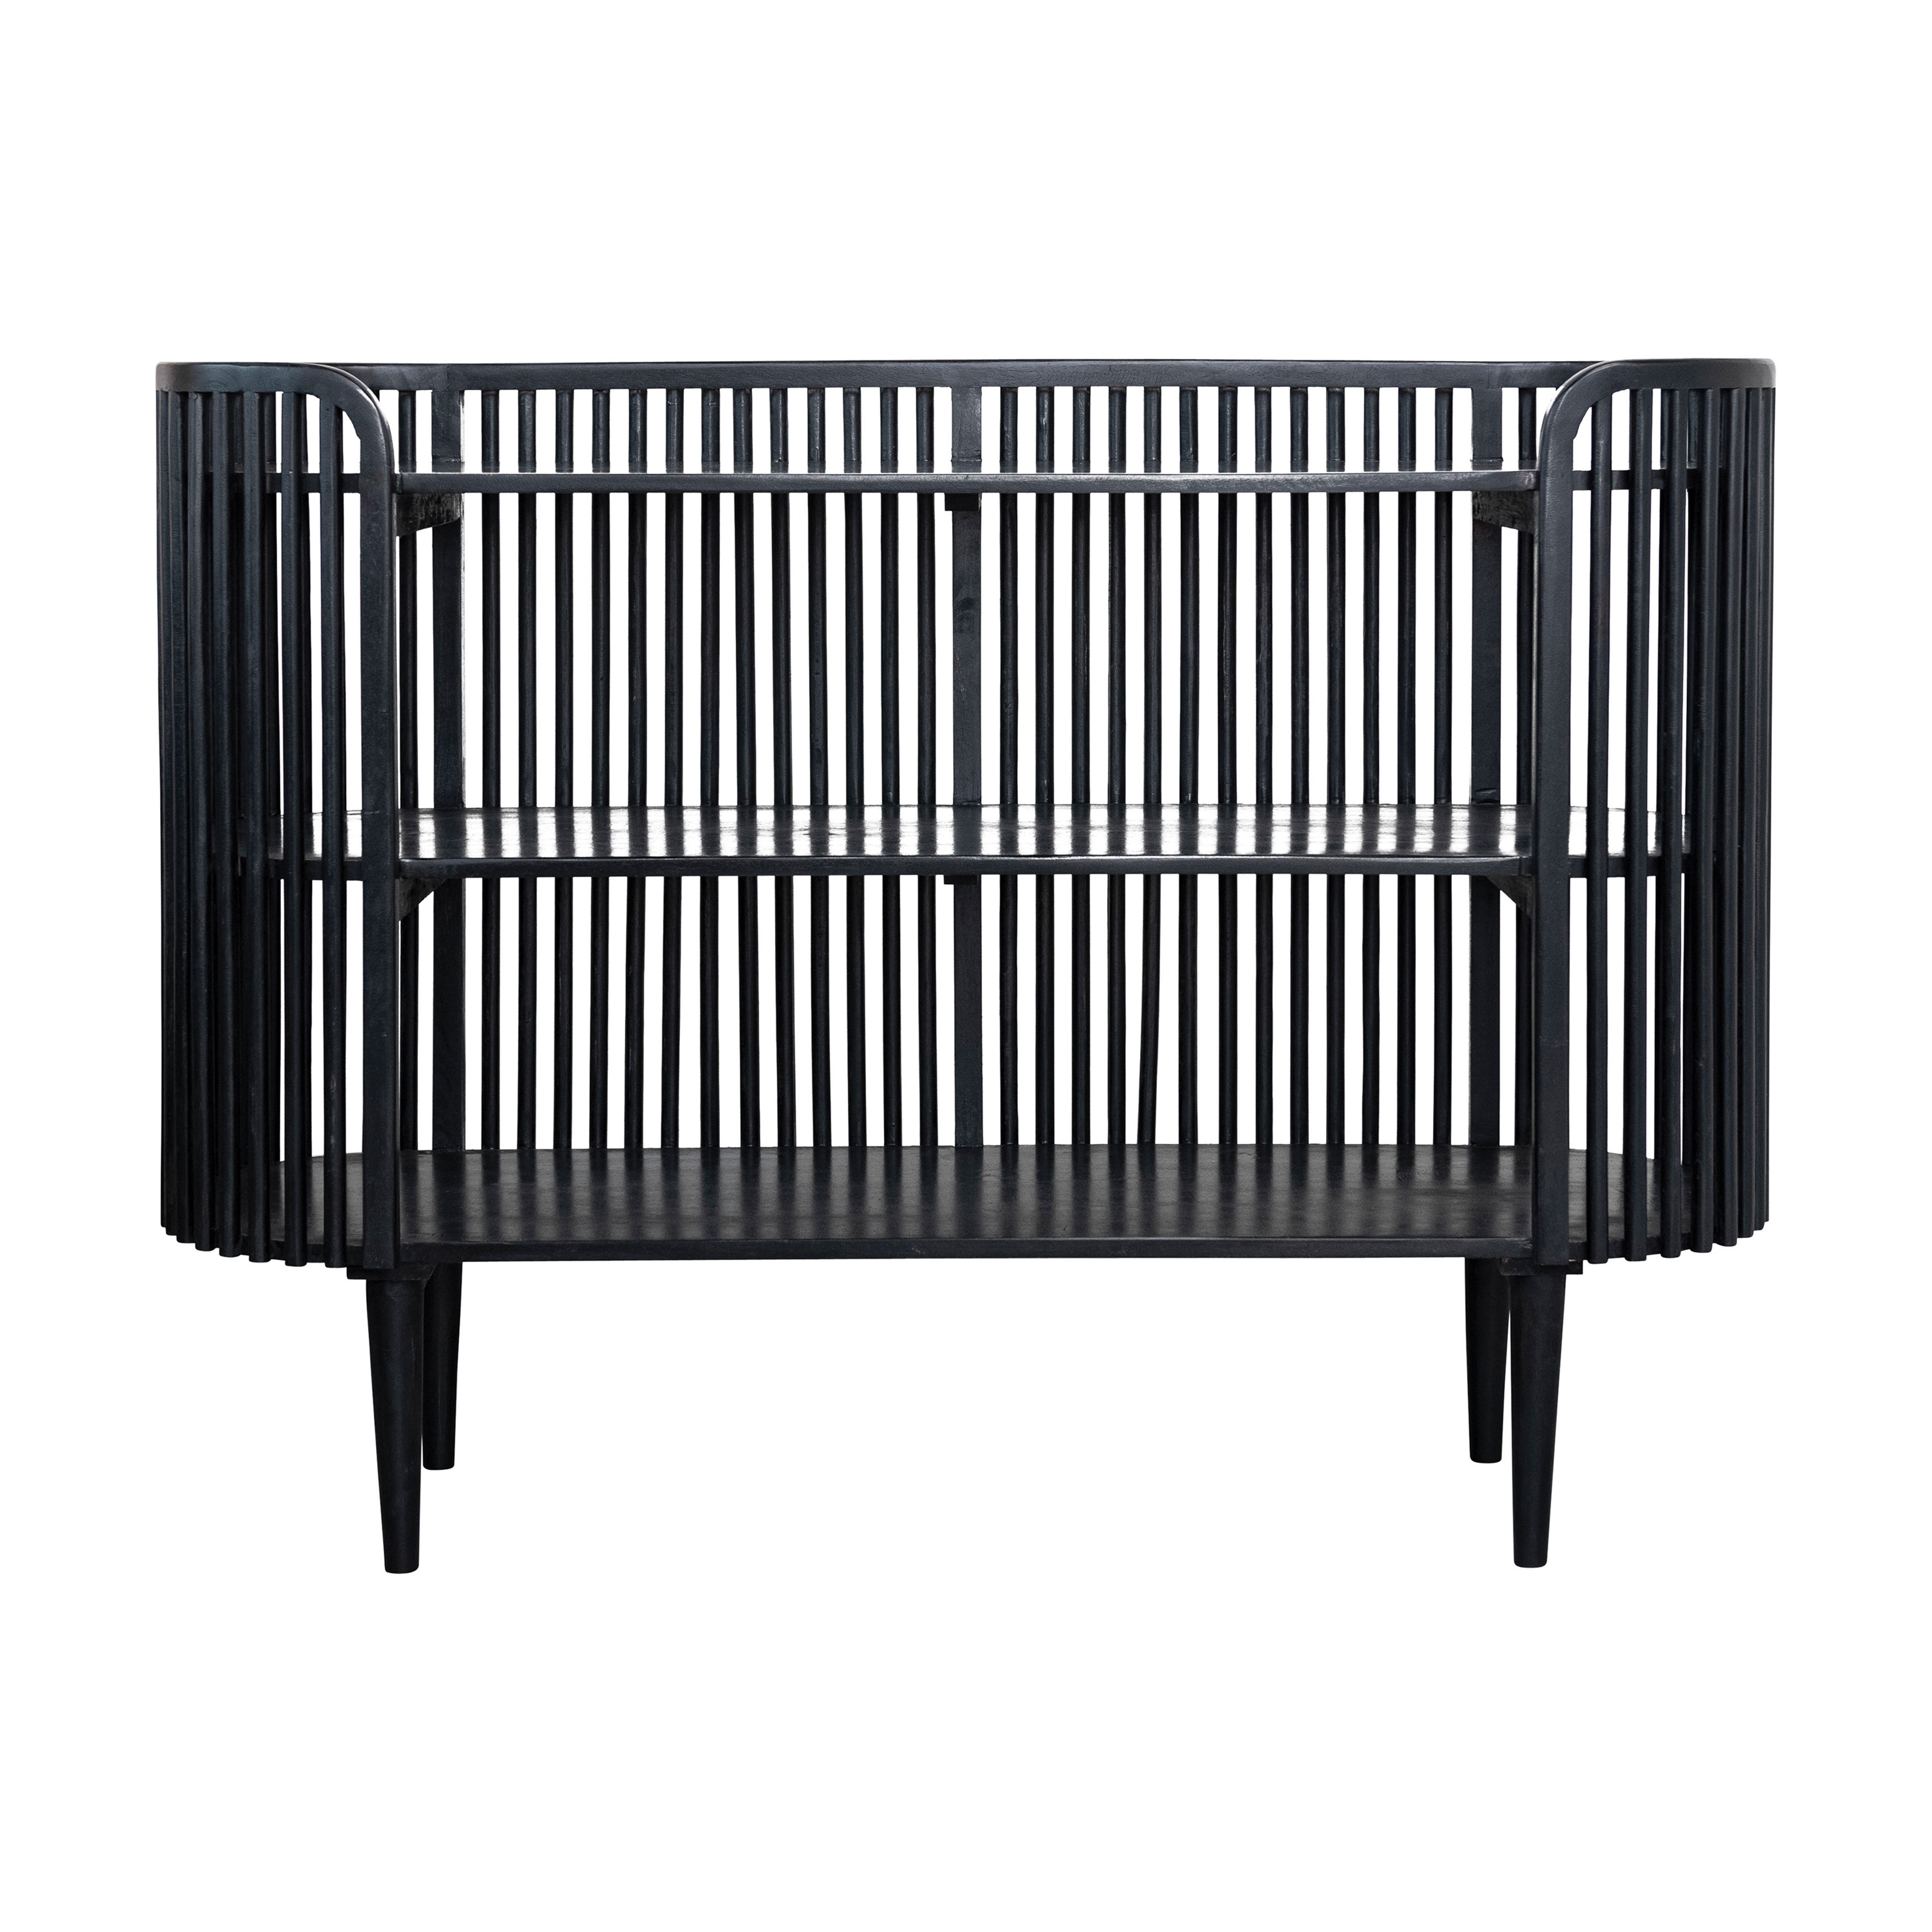 Modern Slatted Wood Console Table with 2 Shelves and Curved Edge, Black - Image 0